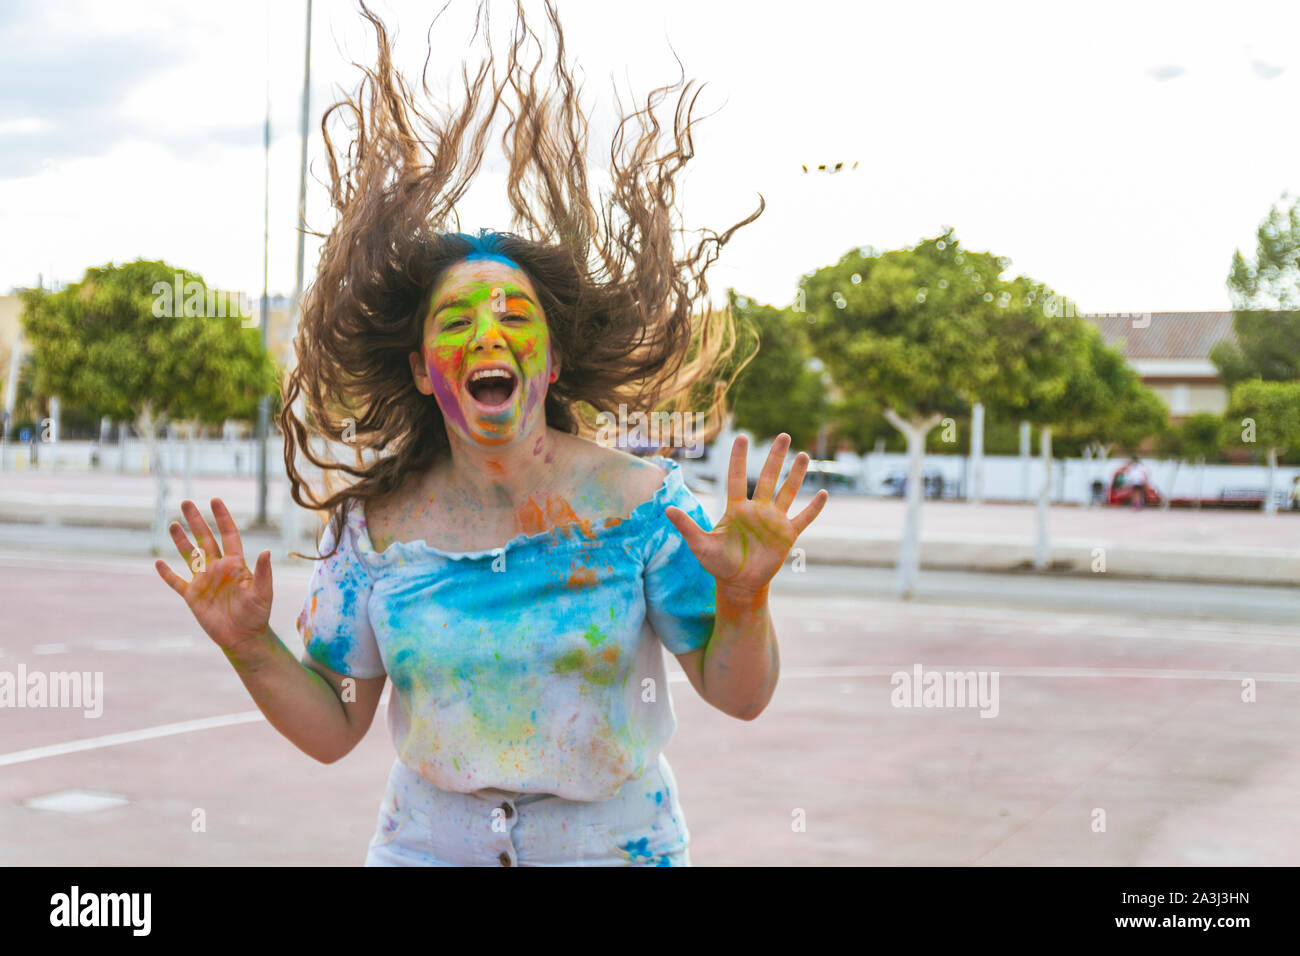 teenage girl jumps and screams for joy, playing with colored powders a Stock Photo